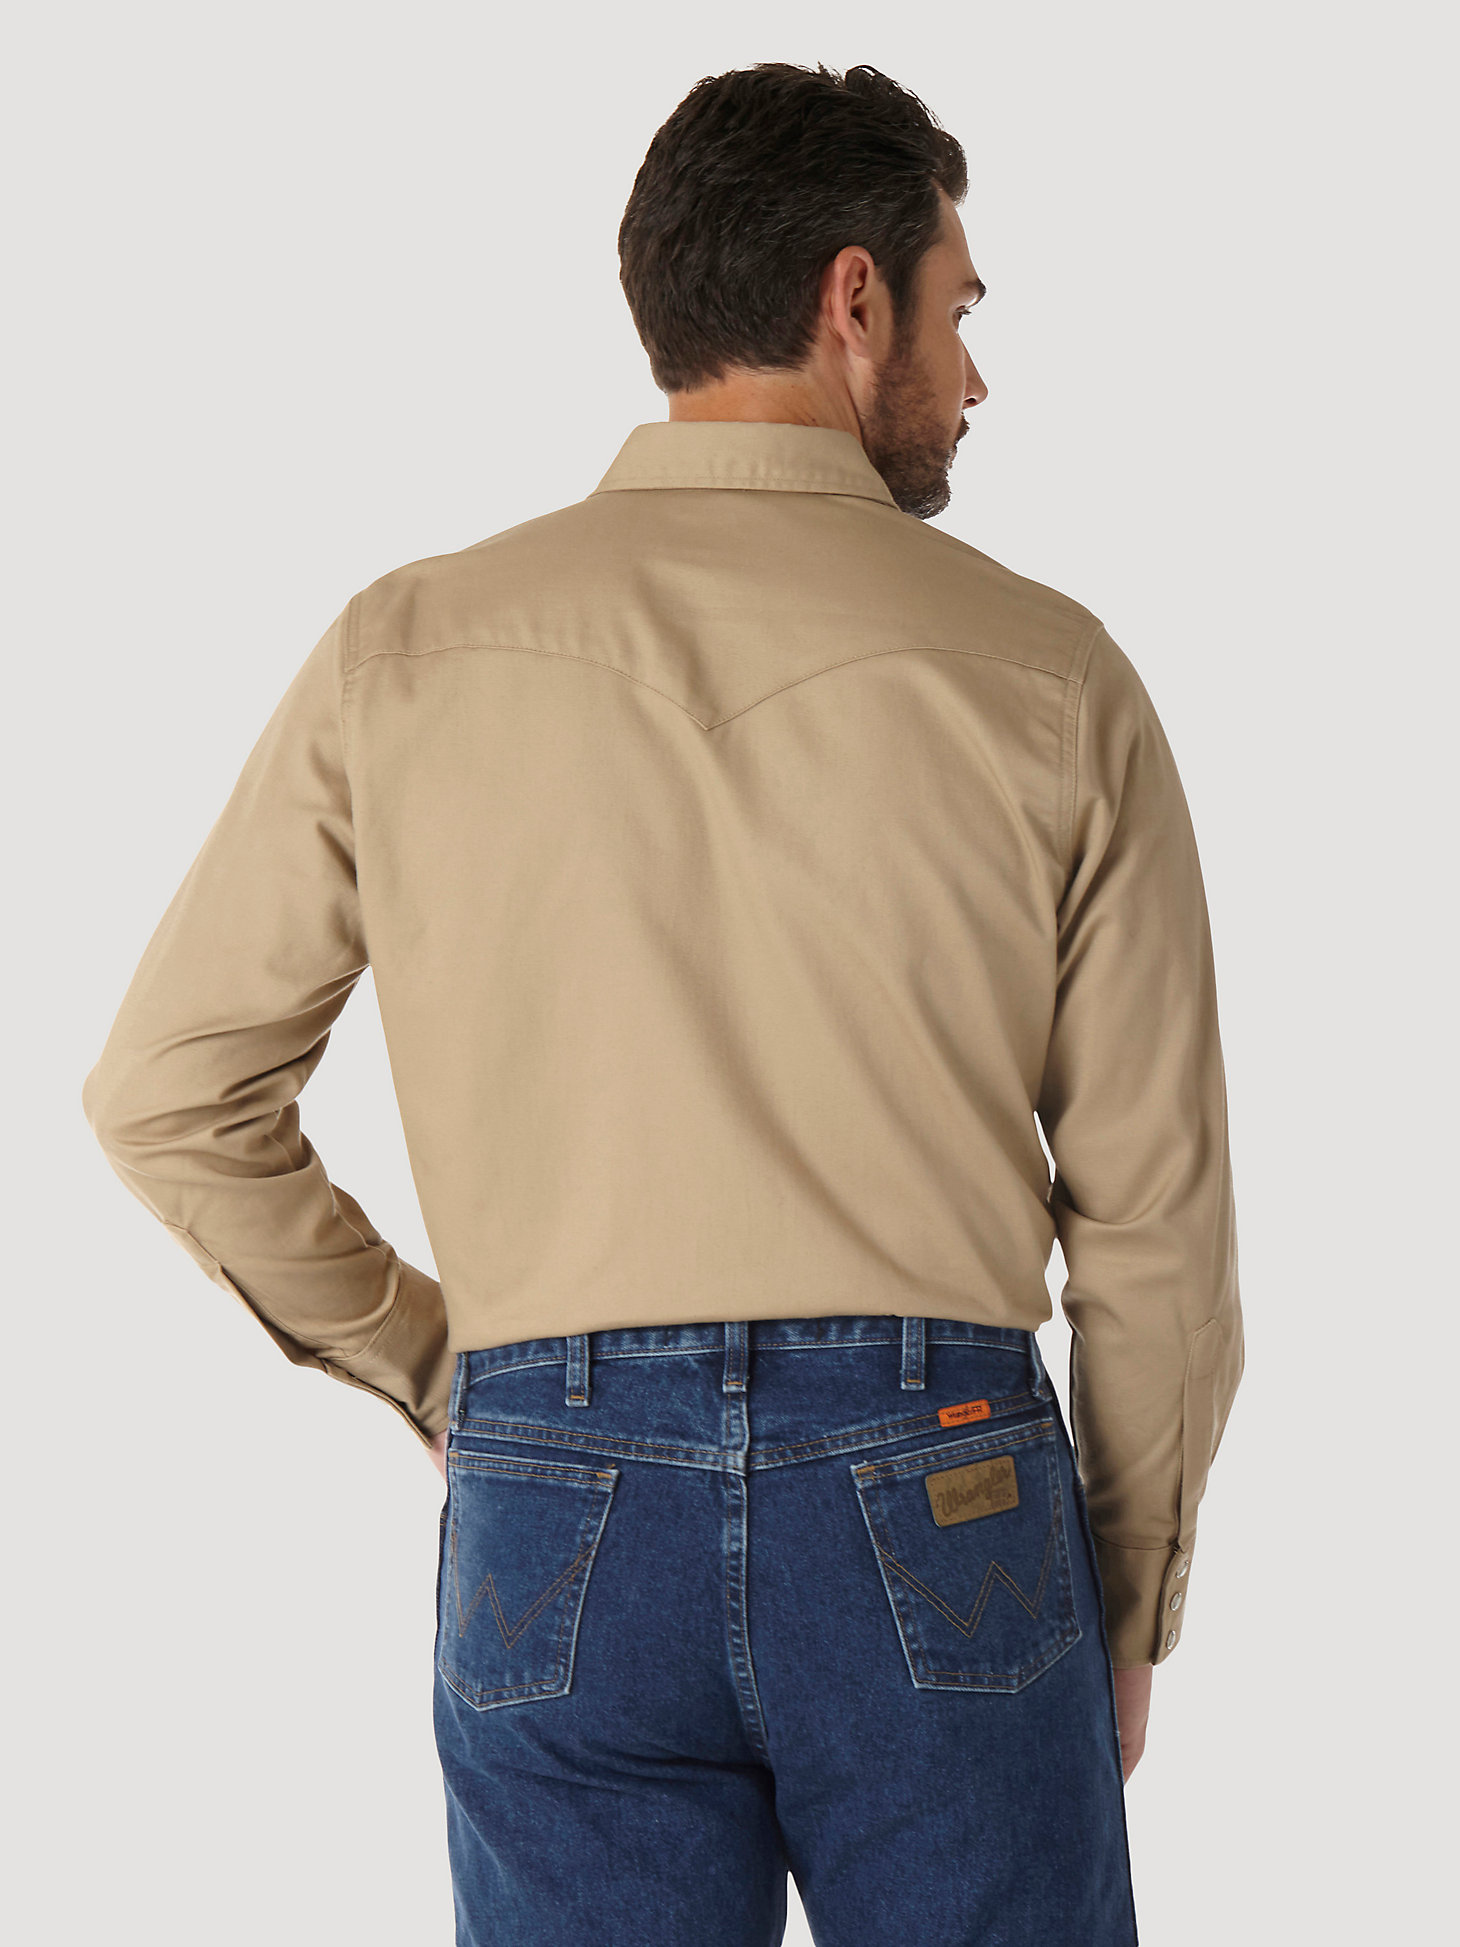 Wrangler® FR Flame Resistant Long Sleeve Western Snap Solid Twill Work Shirt in Khaki alternative view 1